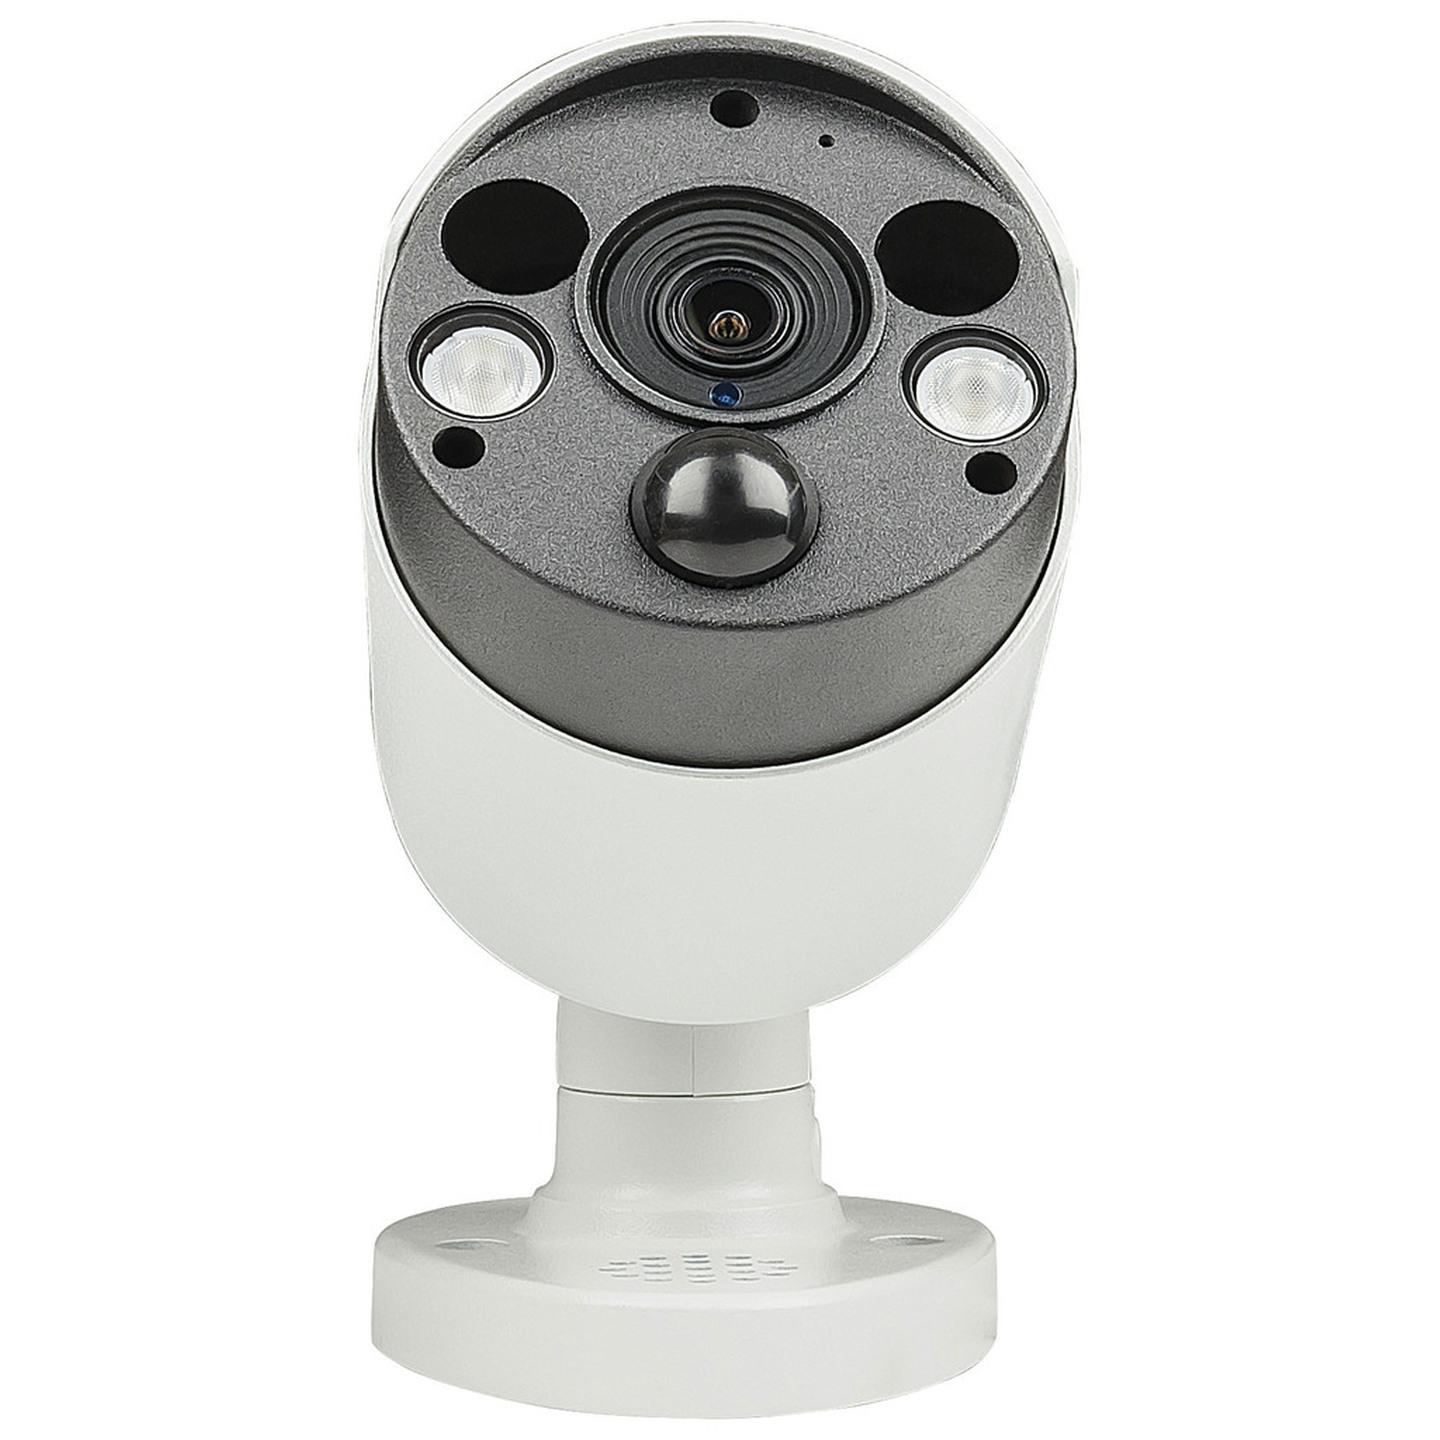 Concord 4K PIR Bullet IP Camera with Floodlight